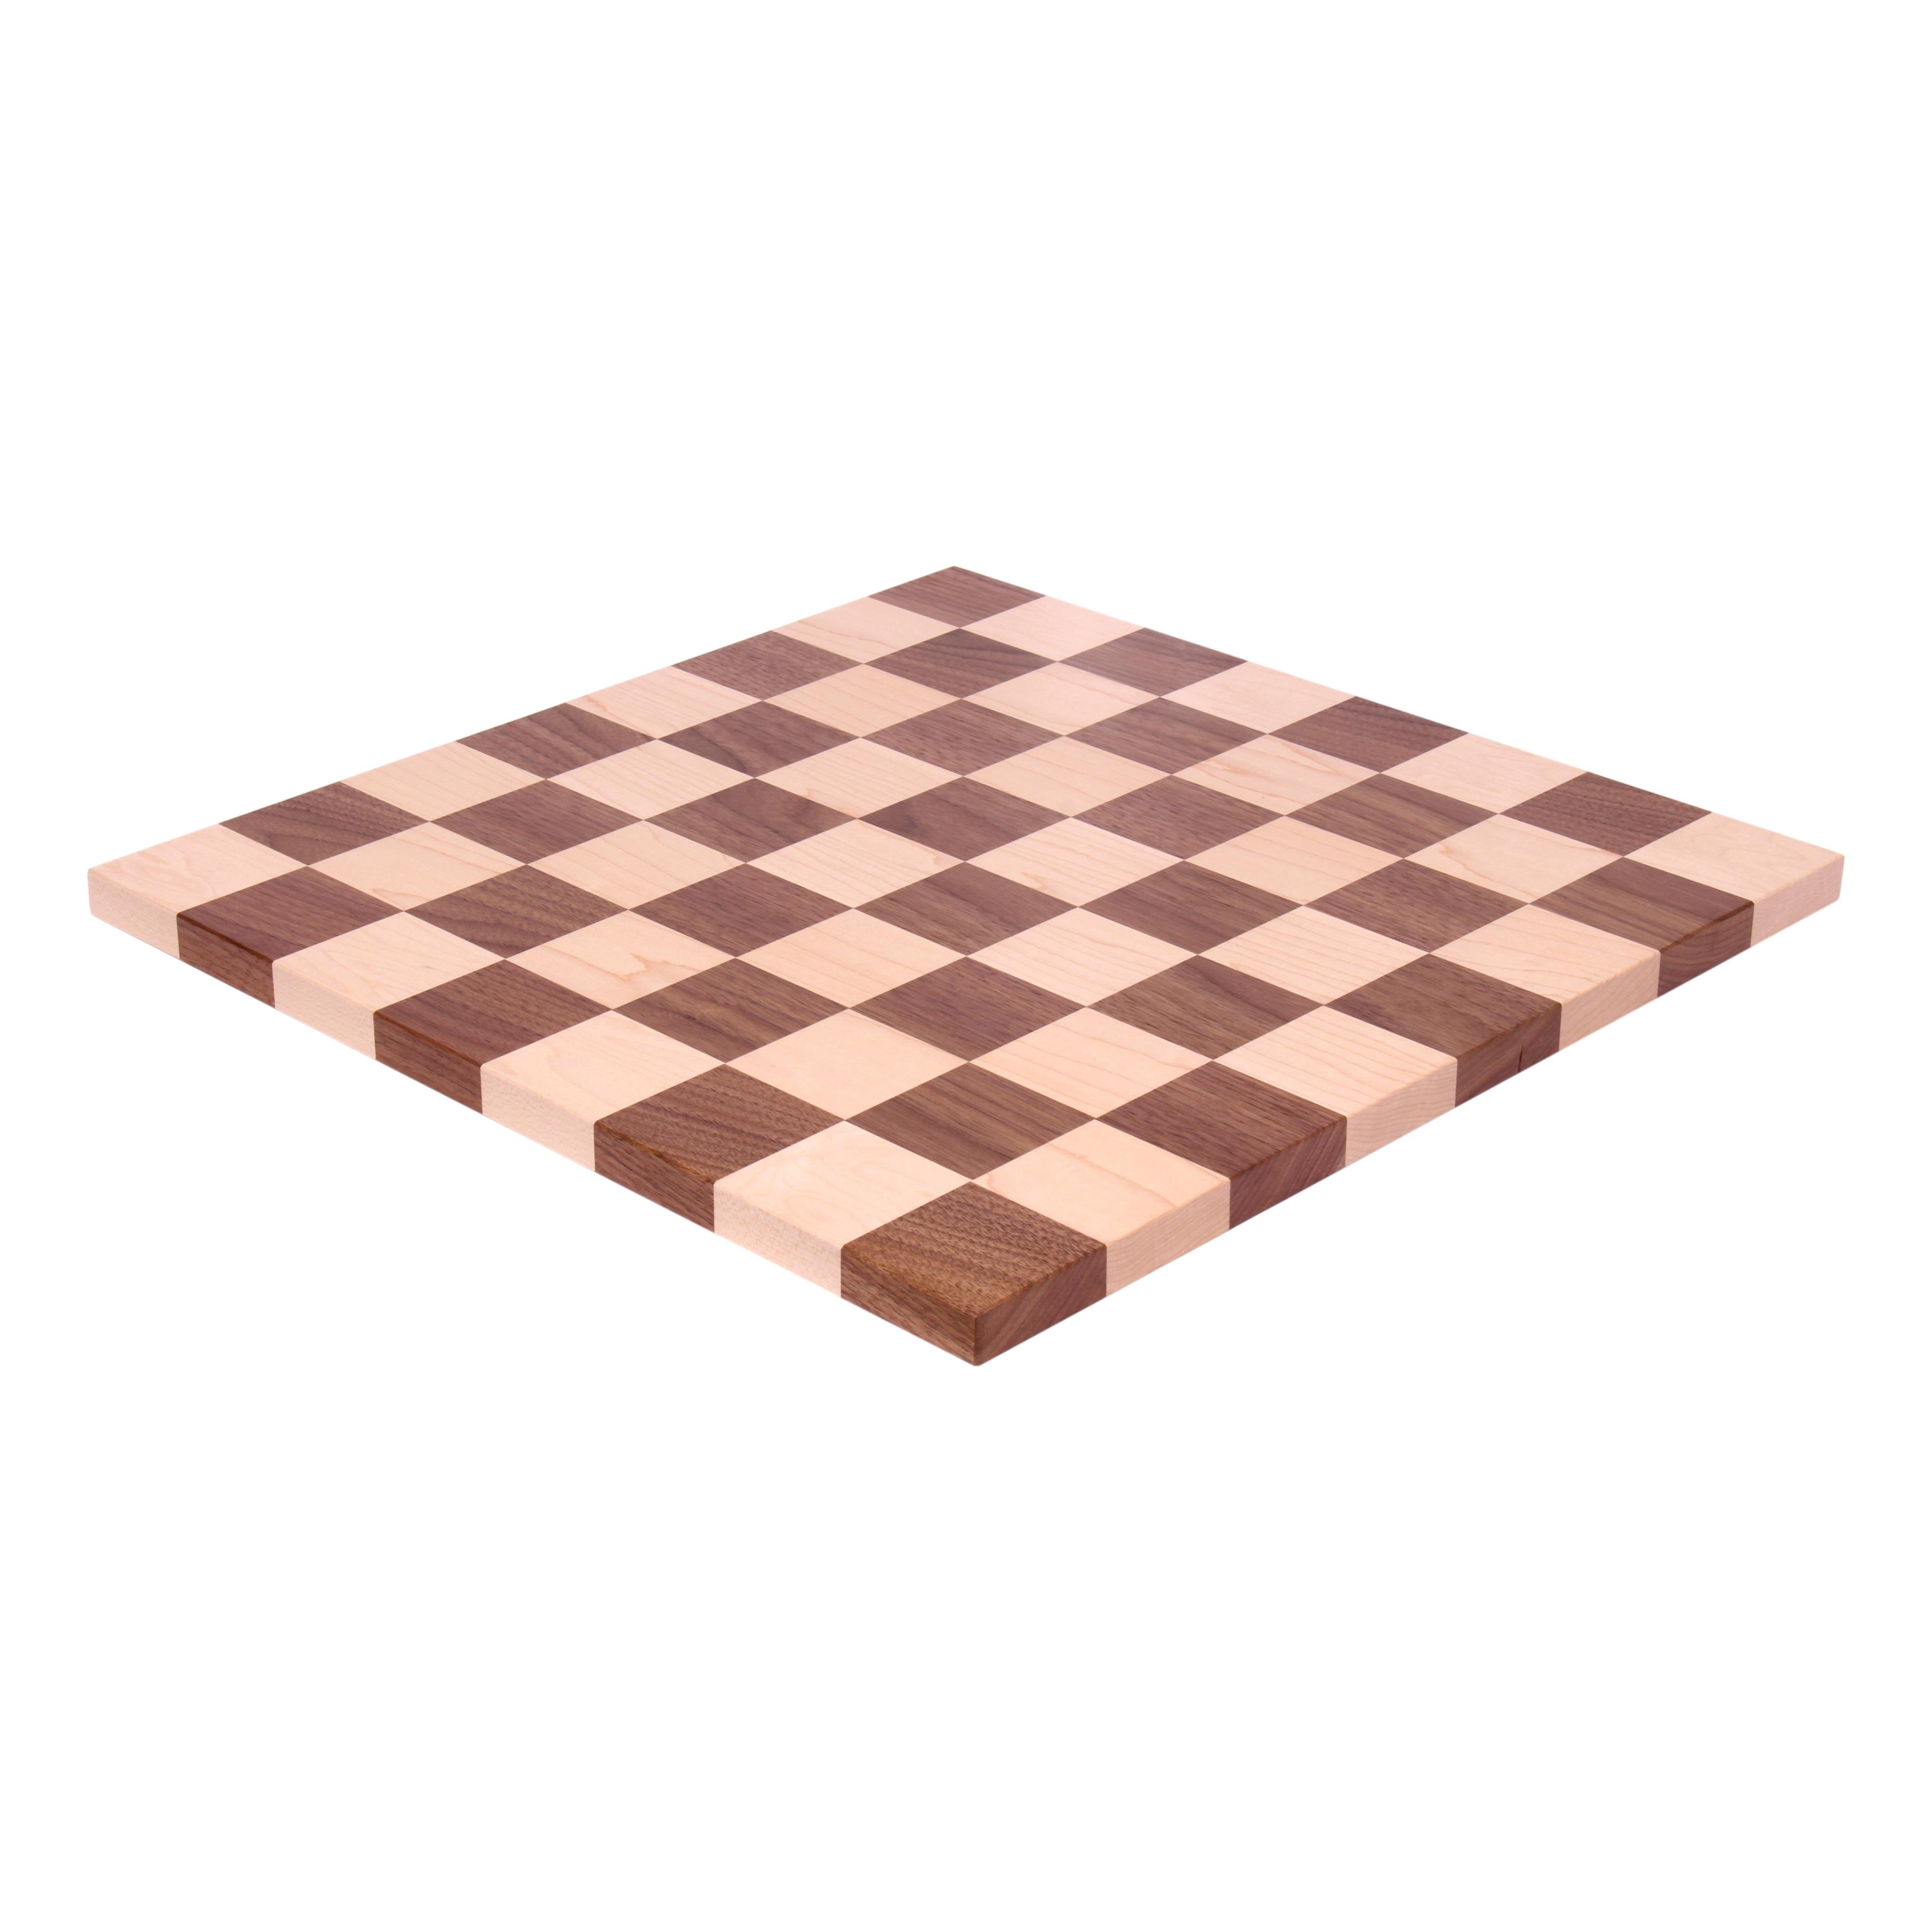 Amish Wooden Checker Board Game